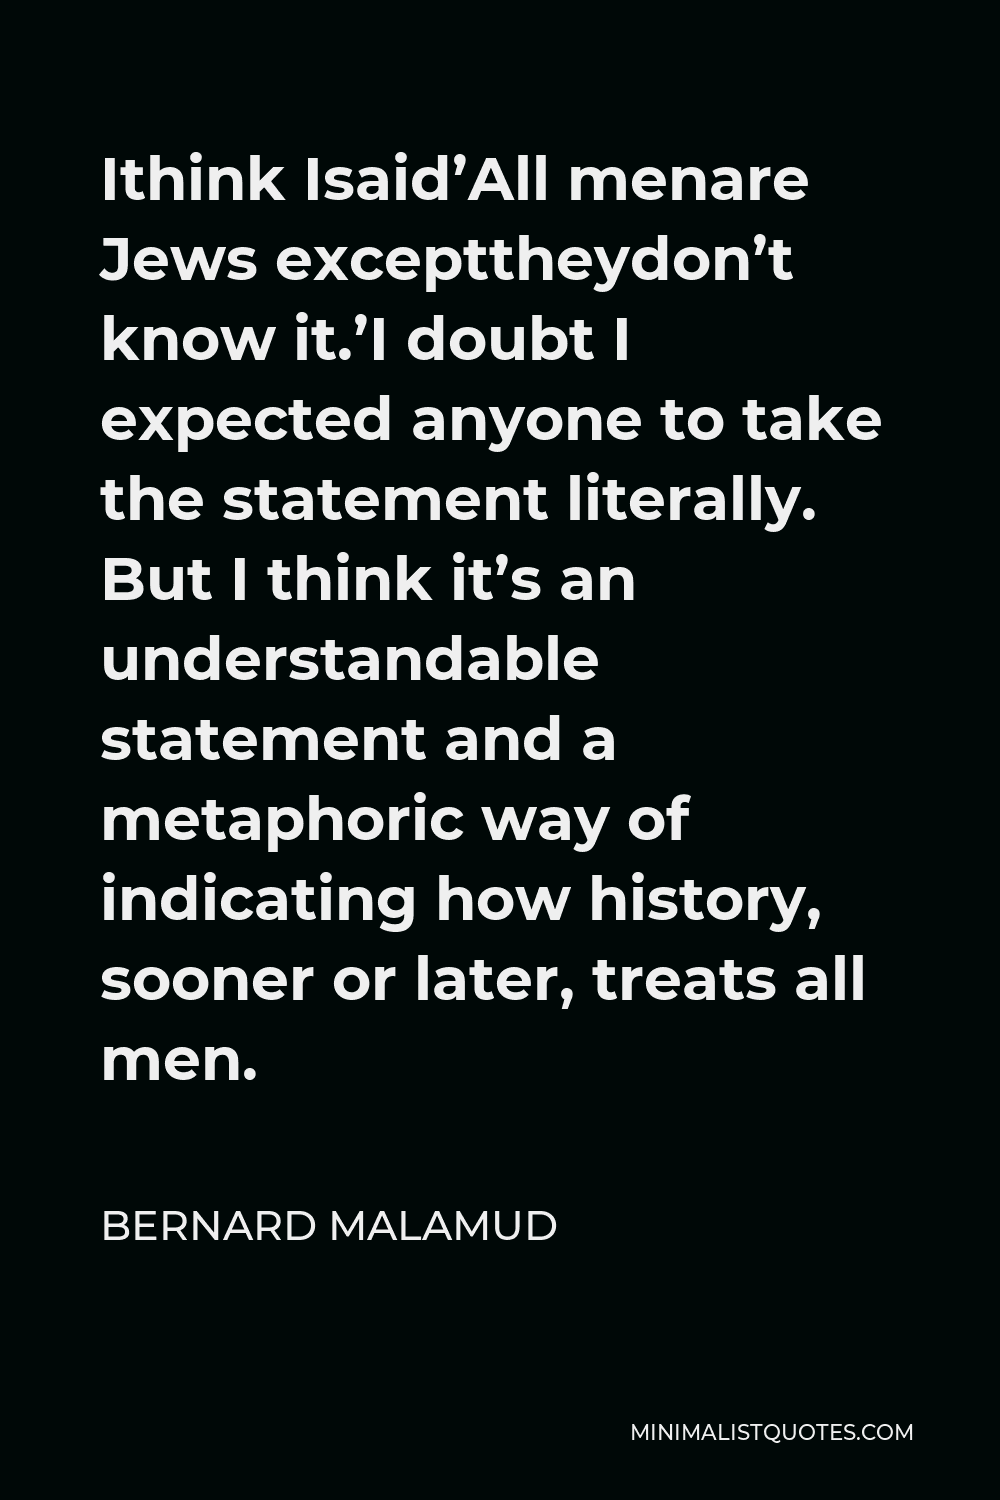 Bernard Malamud Quote - Ithink Isaid’All menare Jews excepttheydon’t know it.’I doubt I expected anyone to take the statement literally. But I think it’s an understandable statement and a metaphoric way of indicating how history, sooner or later, treats all men.